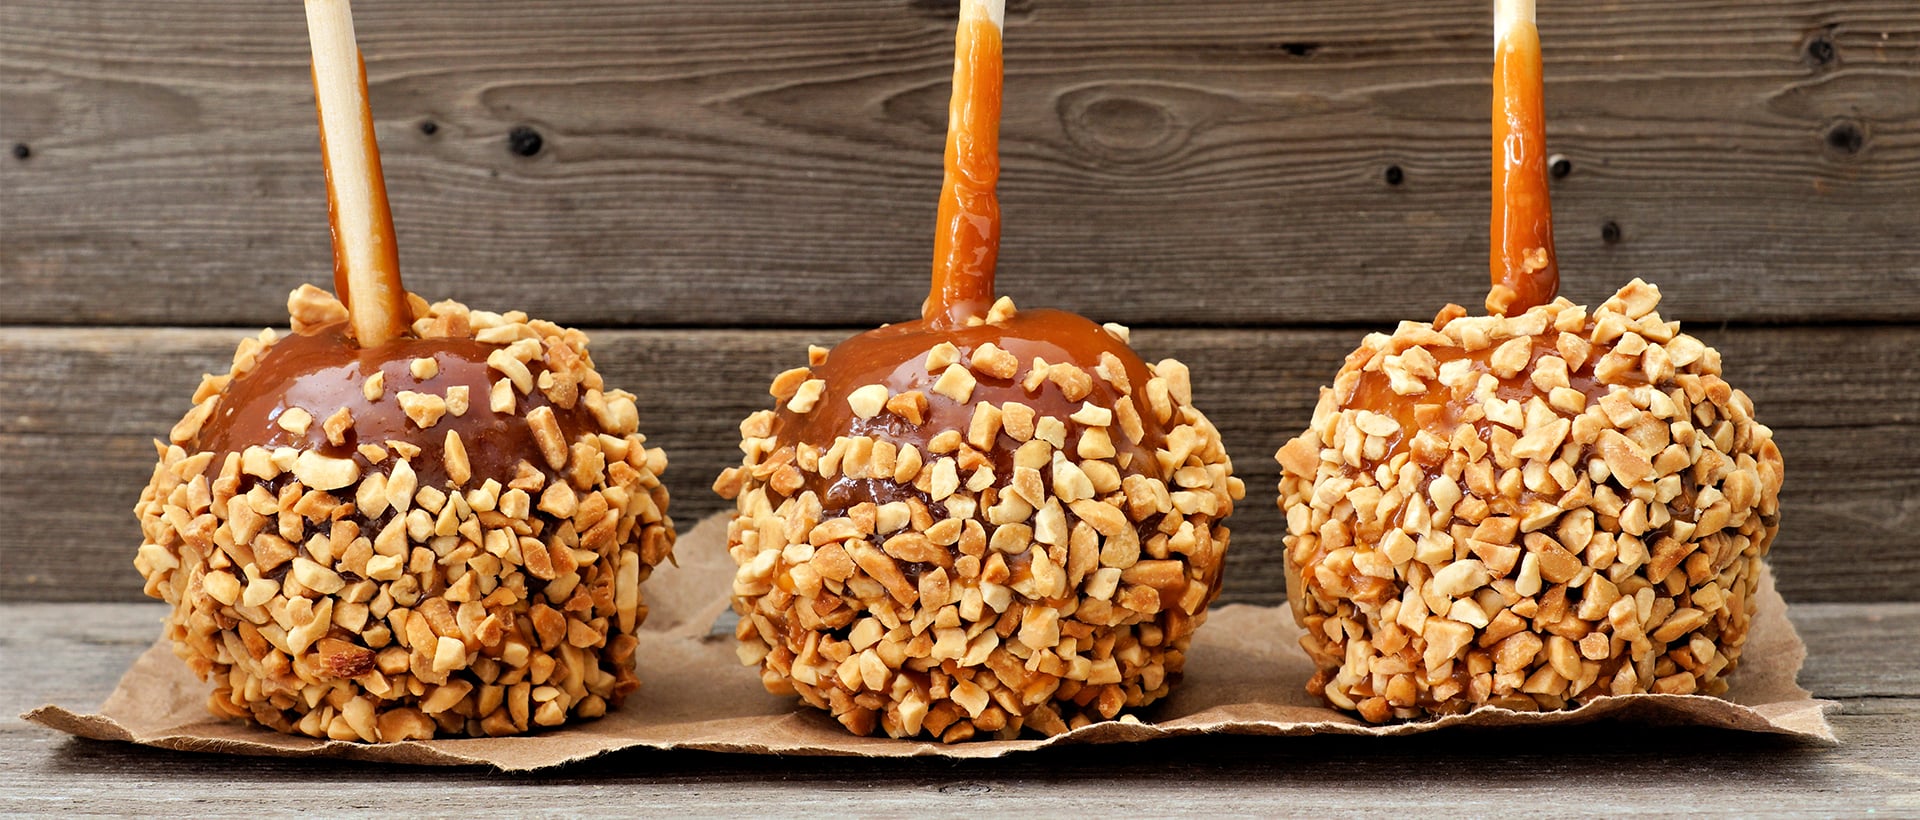 three caramel apples with nuts